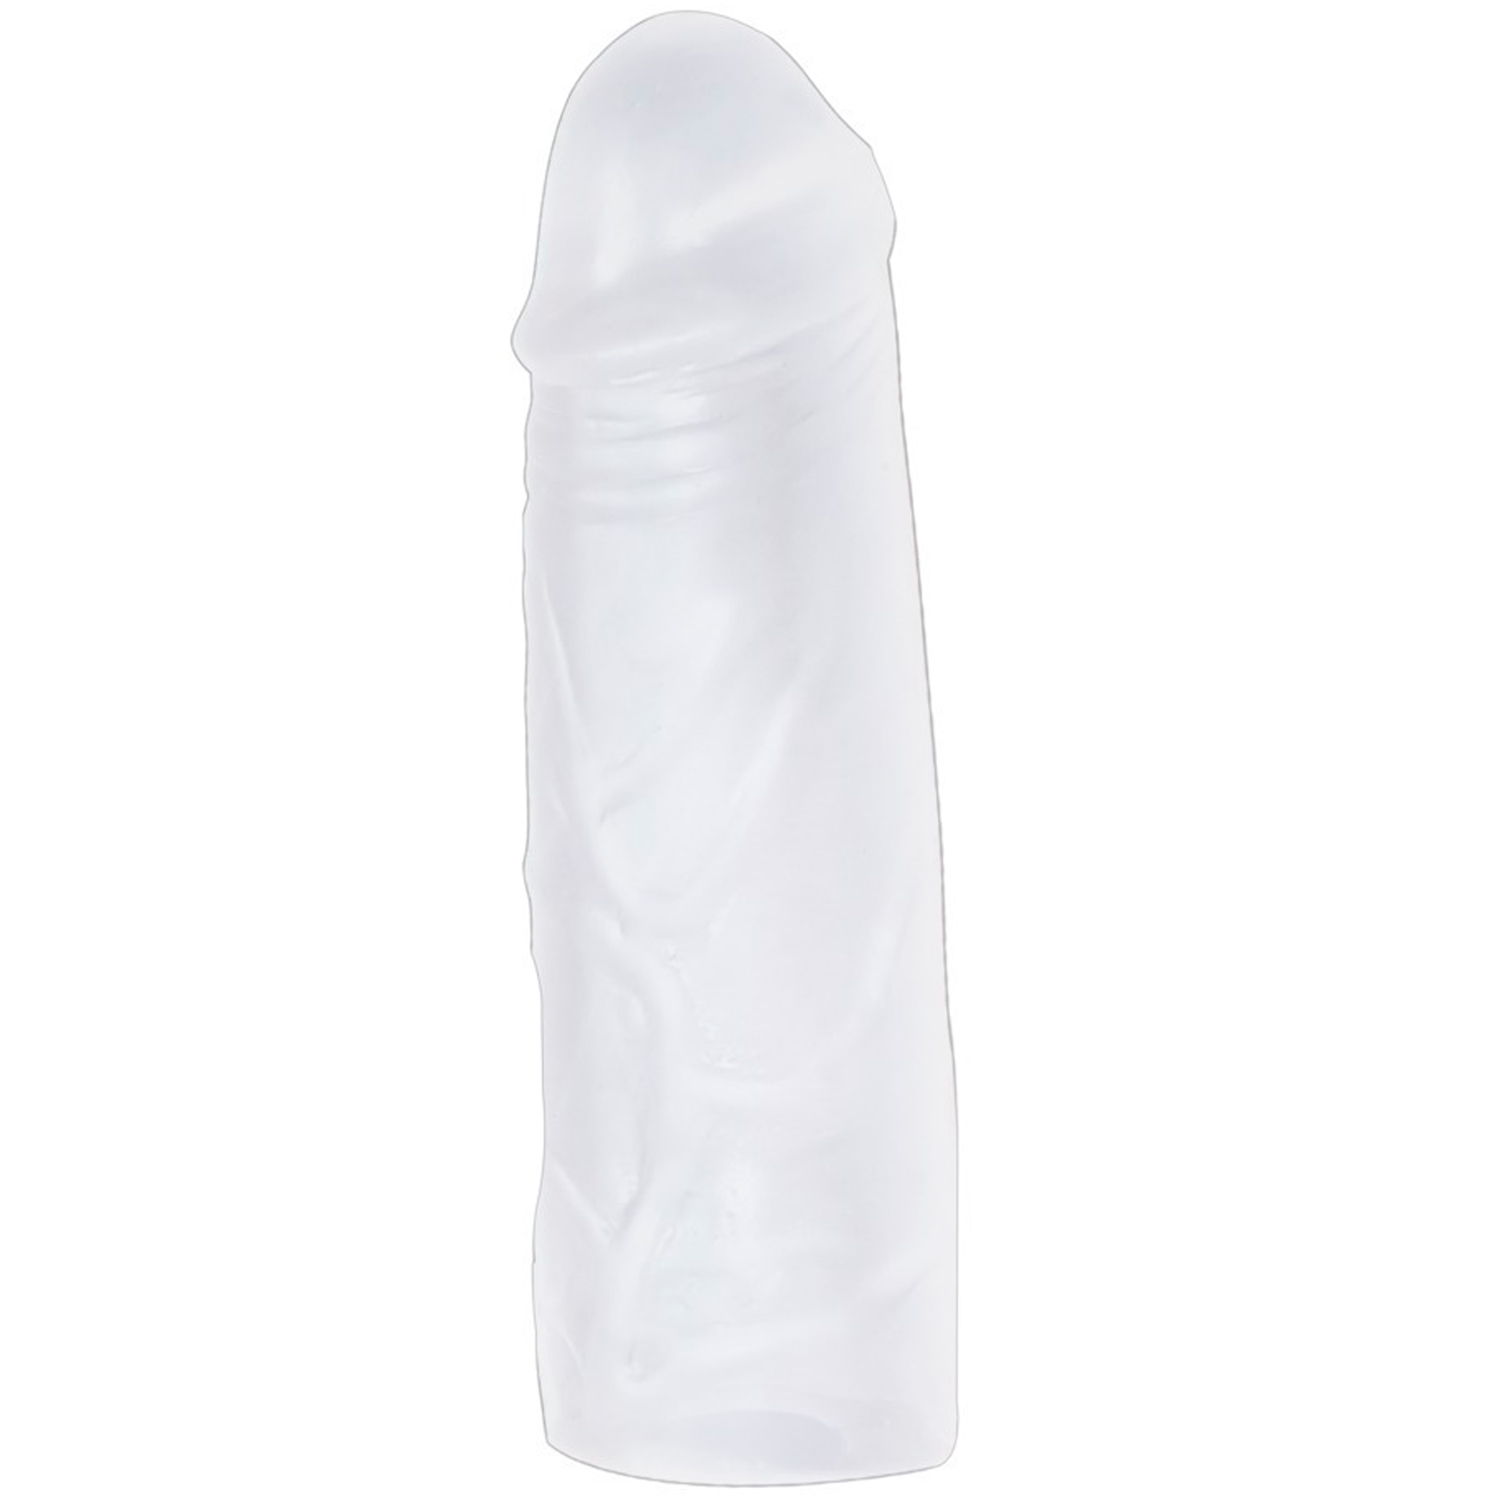 You2Toys Super Dick Sleeve - Clear